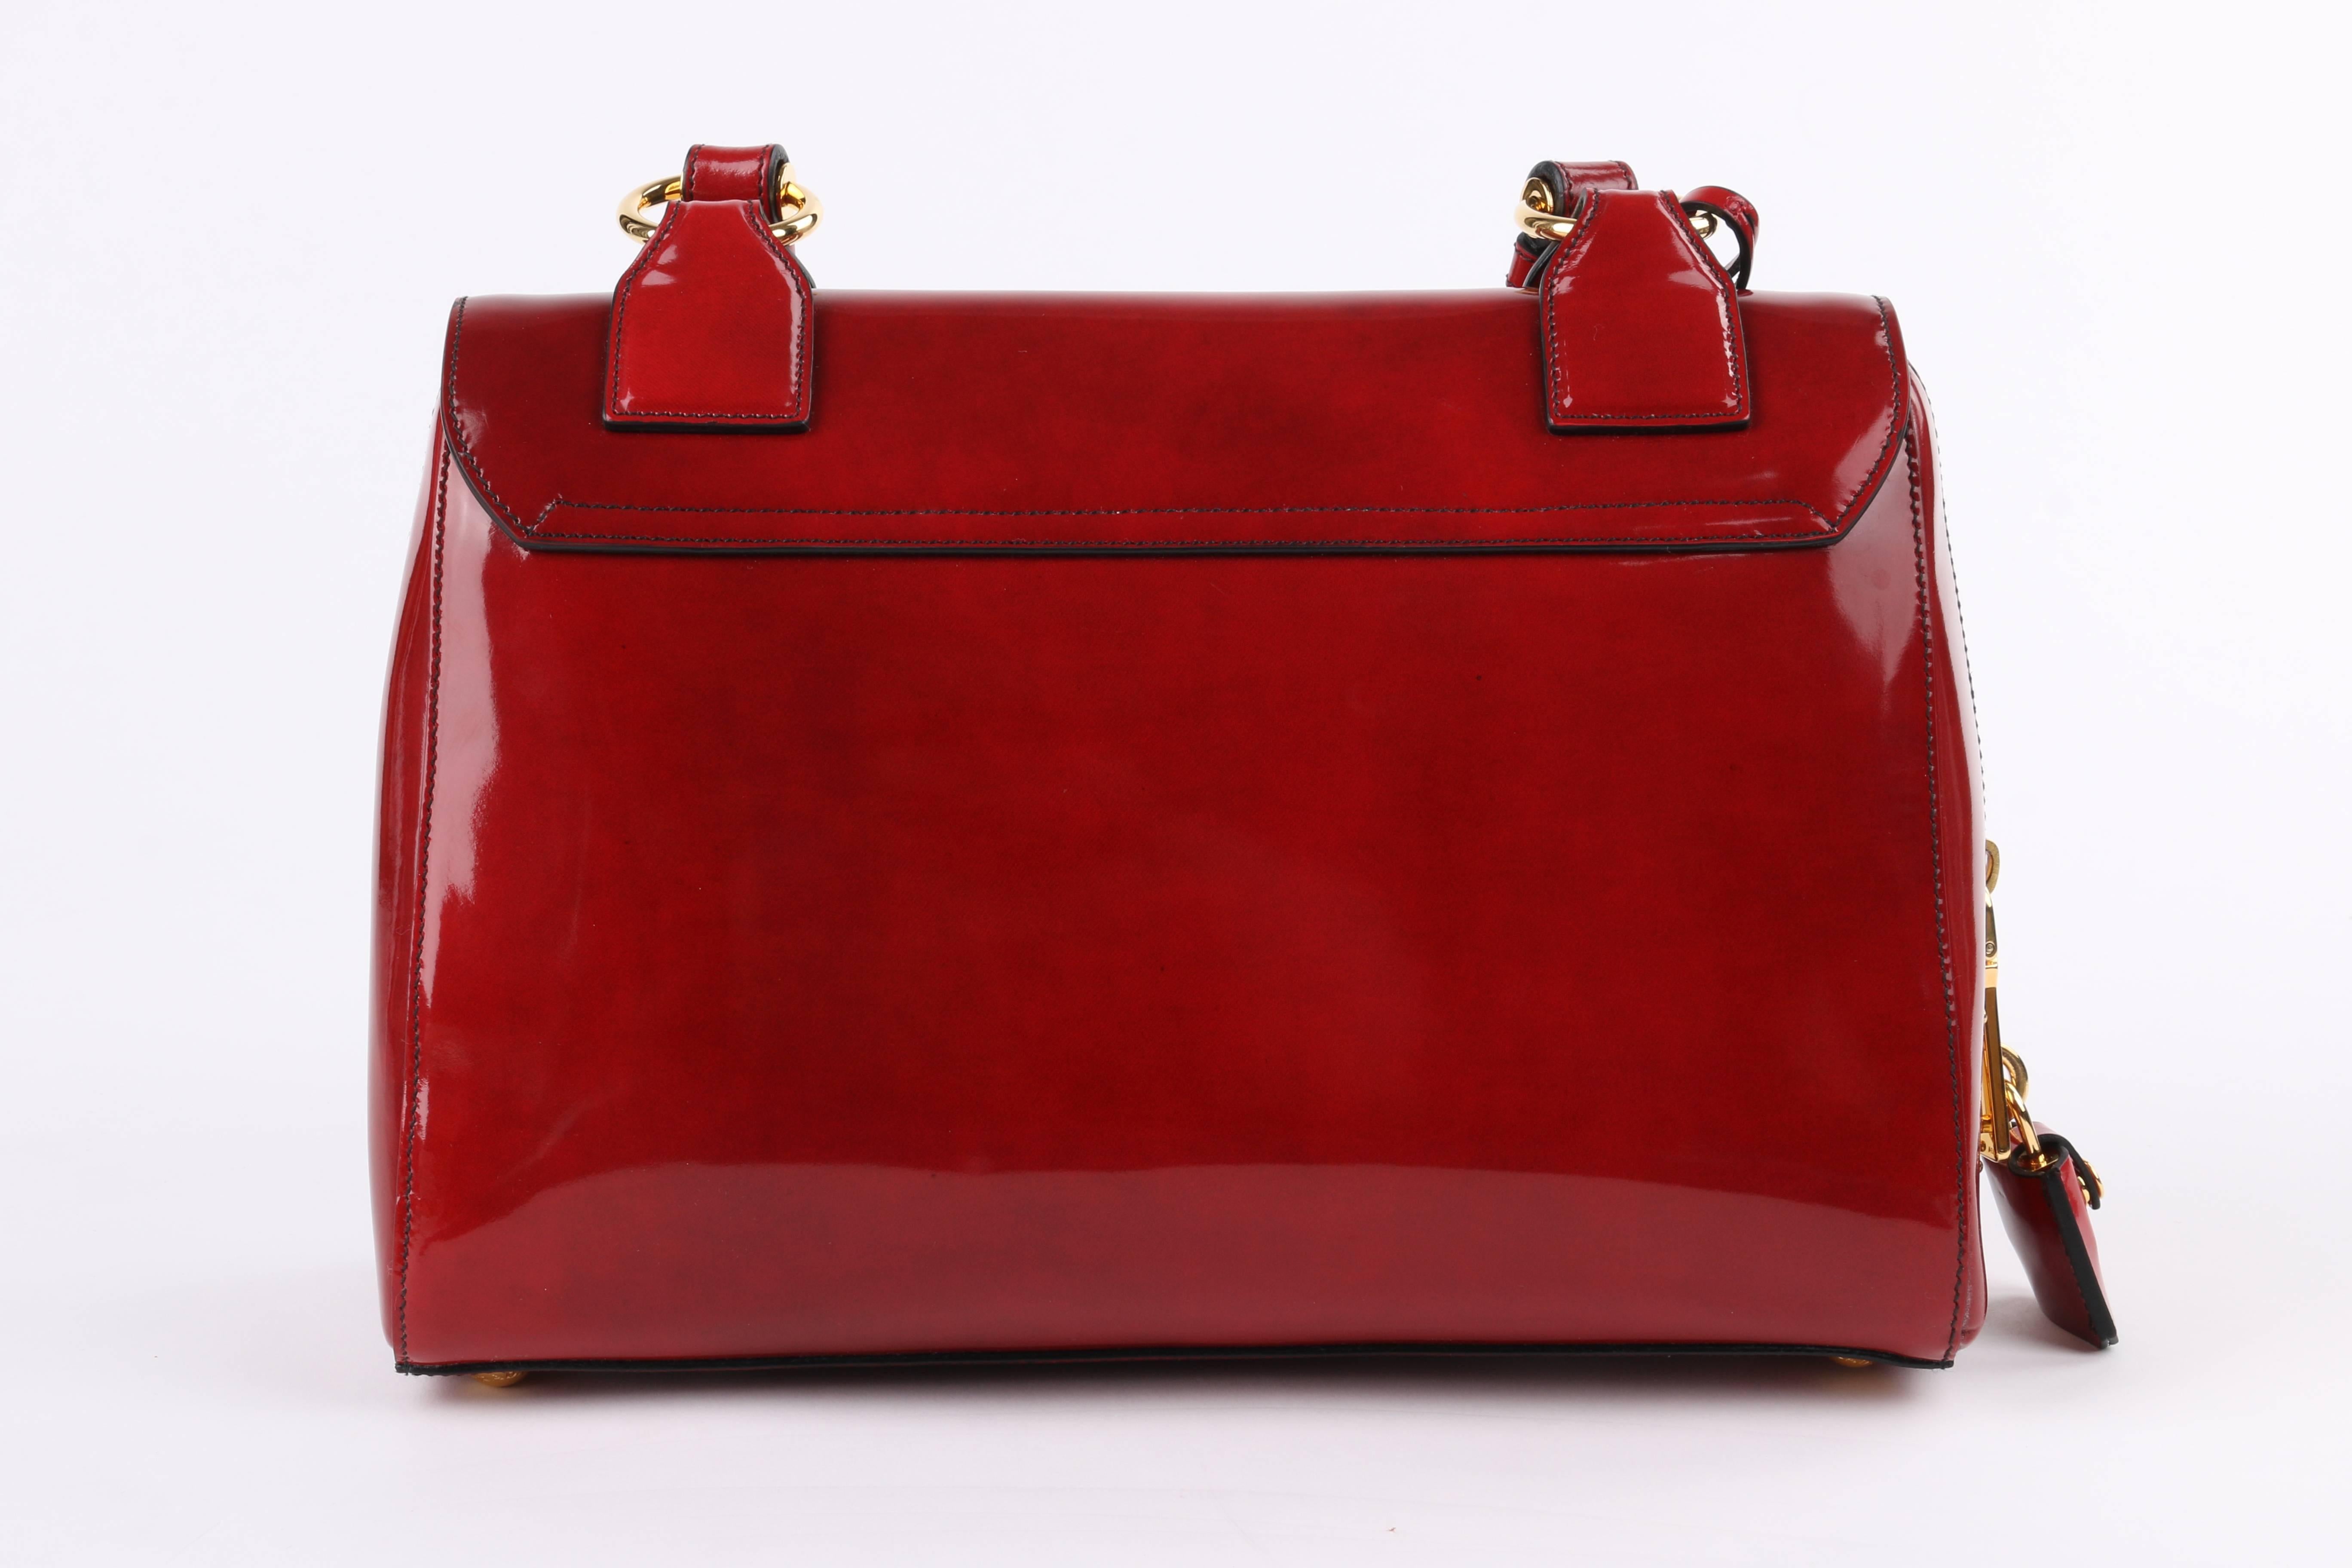 Prada Autumn/Winter 2012 scarlet red spazzolato (brushed/patent) leather turn lock purse. Runway look #13. Scarlet smoke (scarlatto fume) red calfskin leather body. Single top handle with adjustable gold-toned buckles on either side. Flap top with